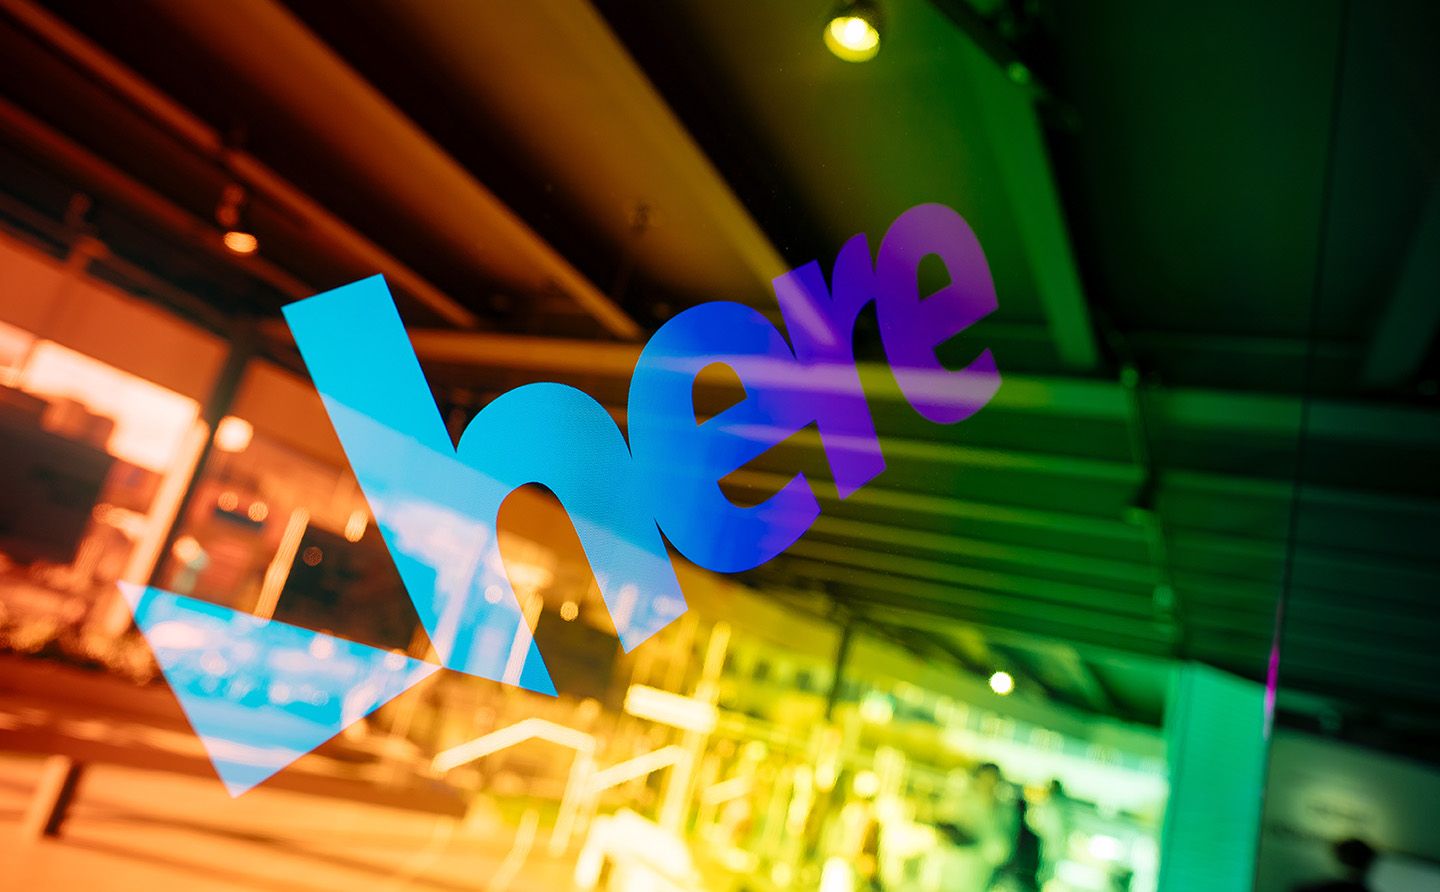 The HERE logo as visible at the HERE Technologies stand at CES in Las Vegas in January 2020 (1)